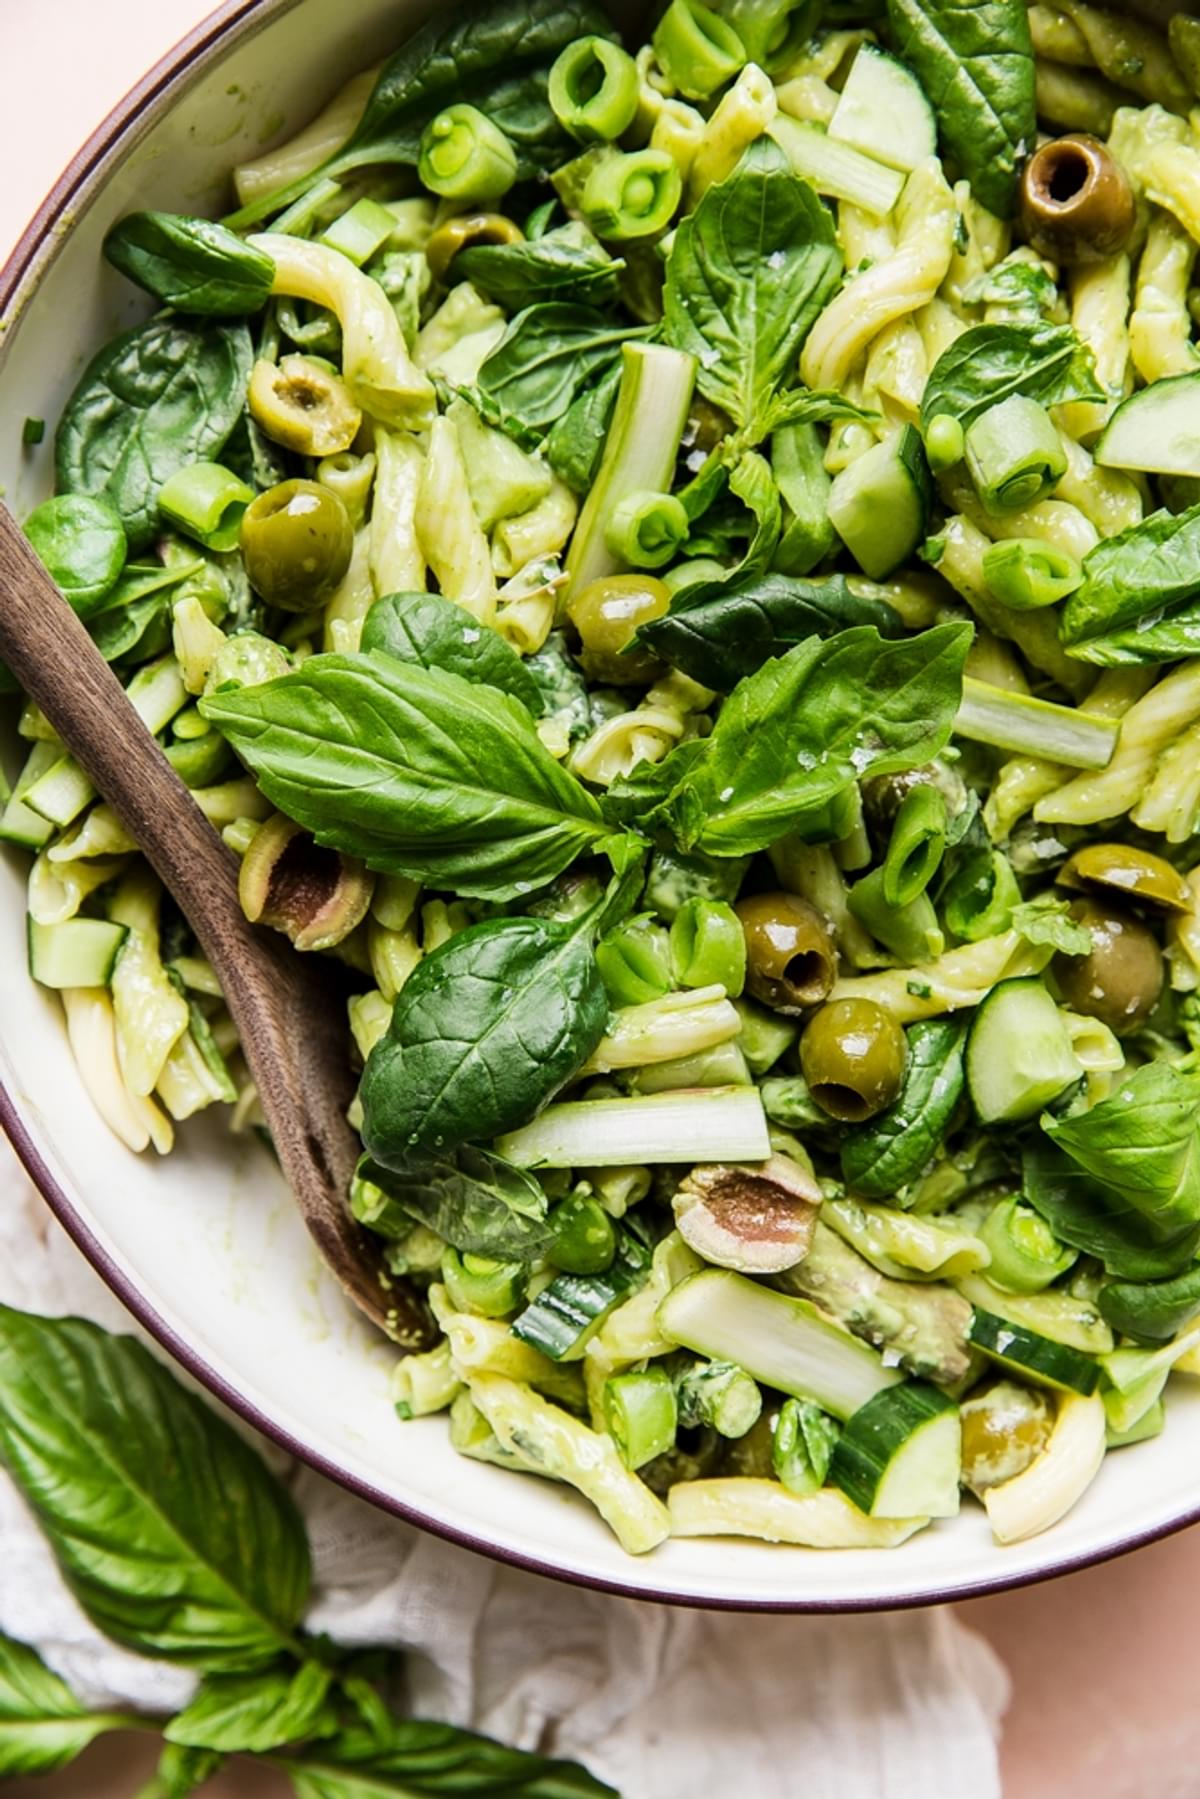 green pasta salad with spinach, cucumber, asparagus, green olives and cucumbers